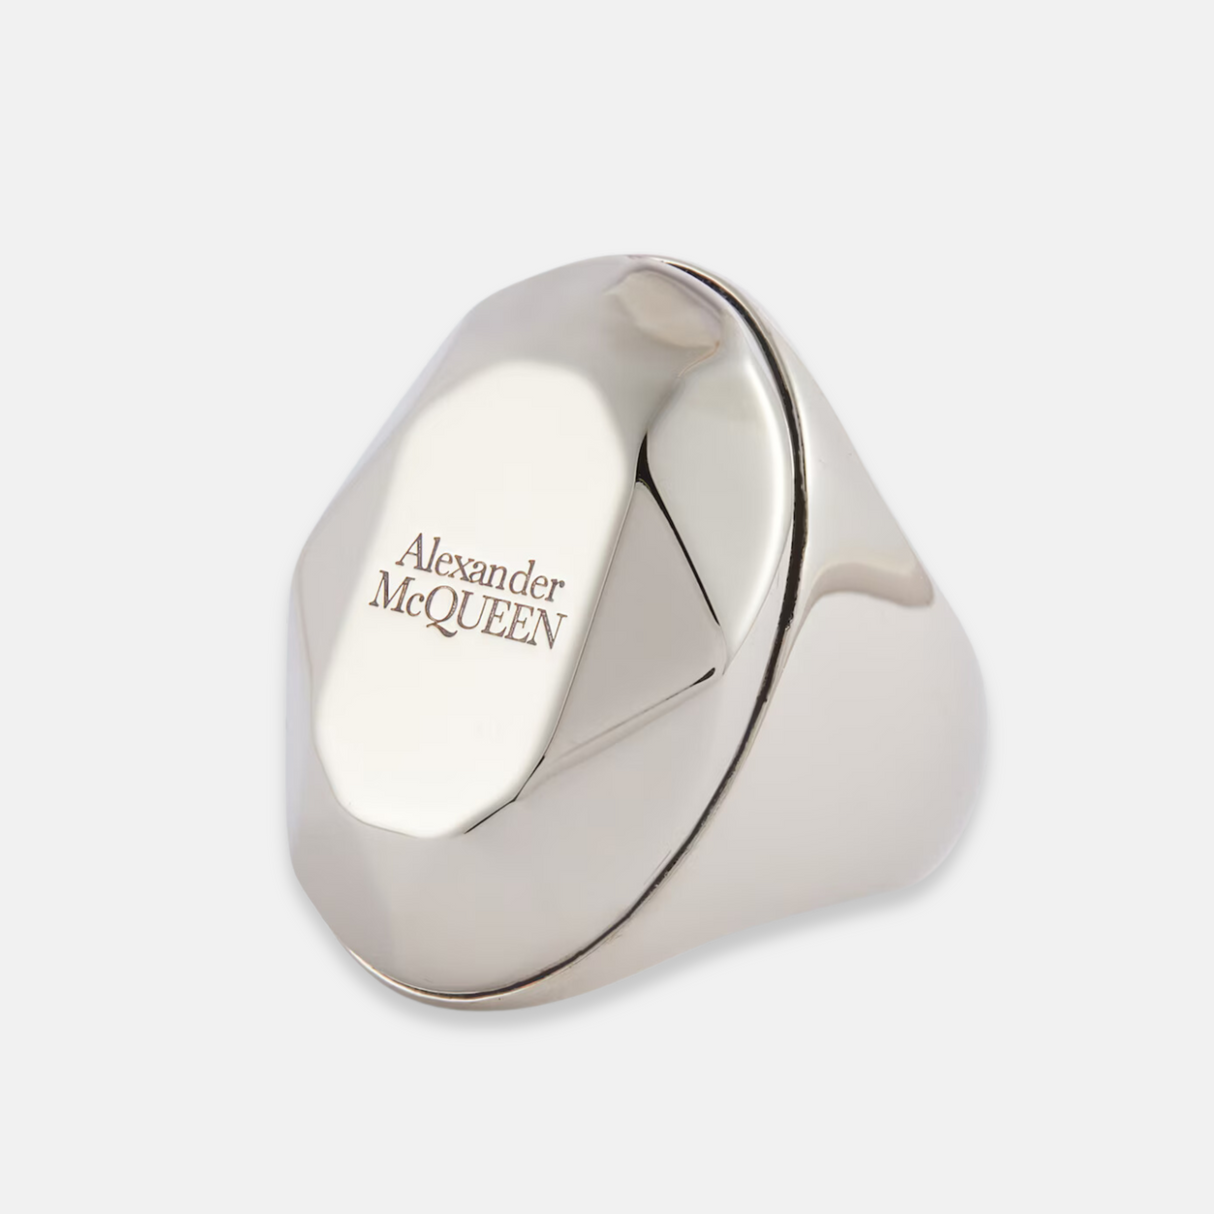 McQueen Engraved Ring in Silver